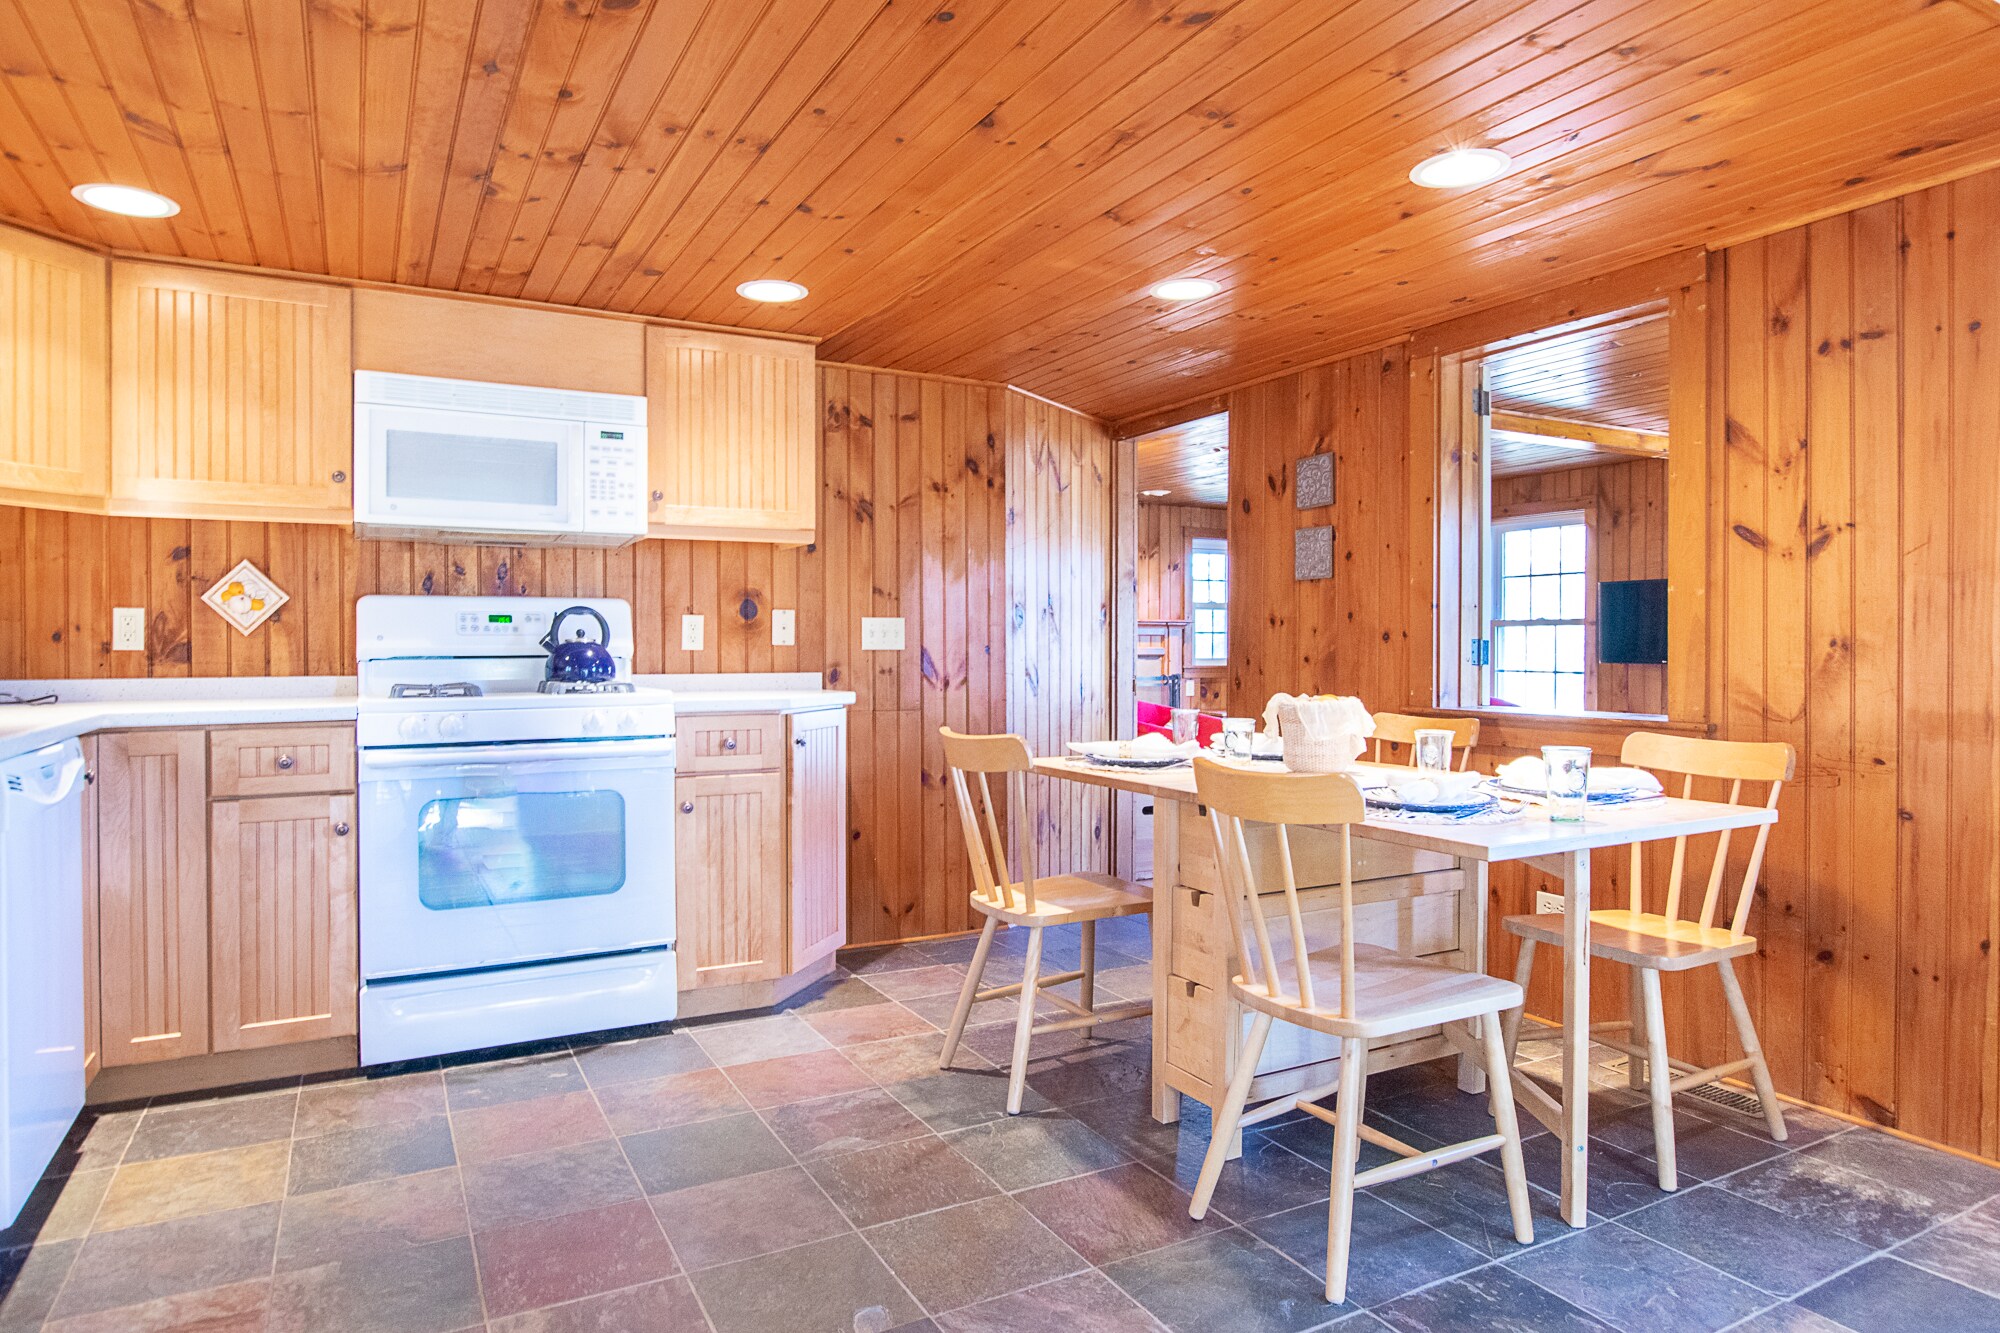 Property Image 2 - 17741: 5 Min. From Earle Rd. Beach, with Sunroom, Firepit and Outdoor Shower!